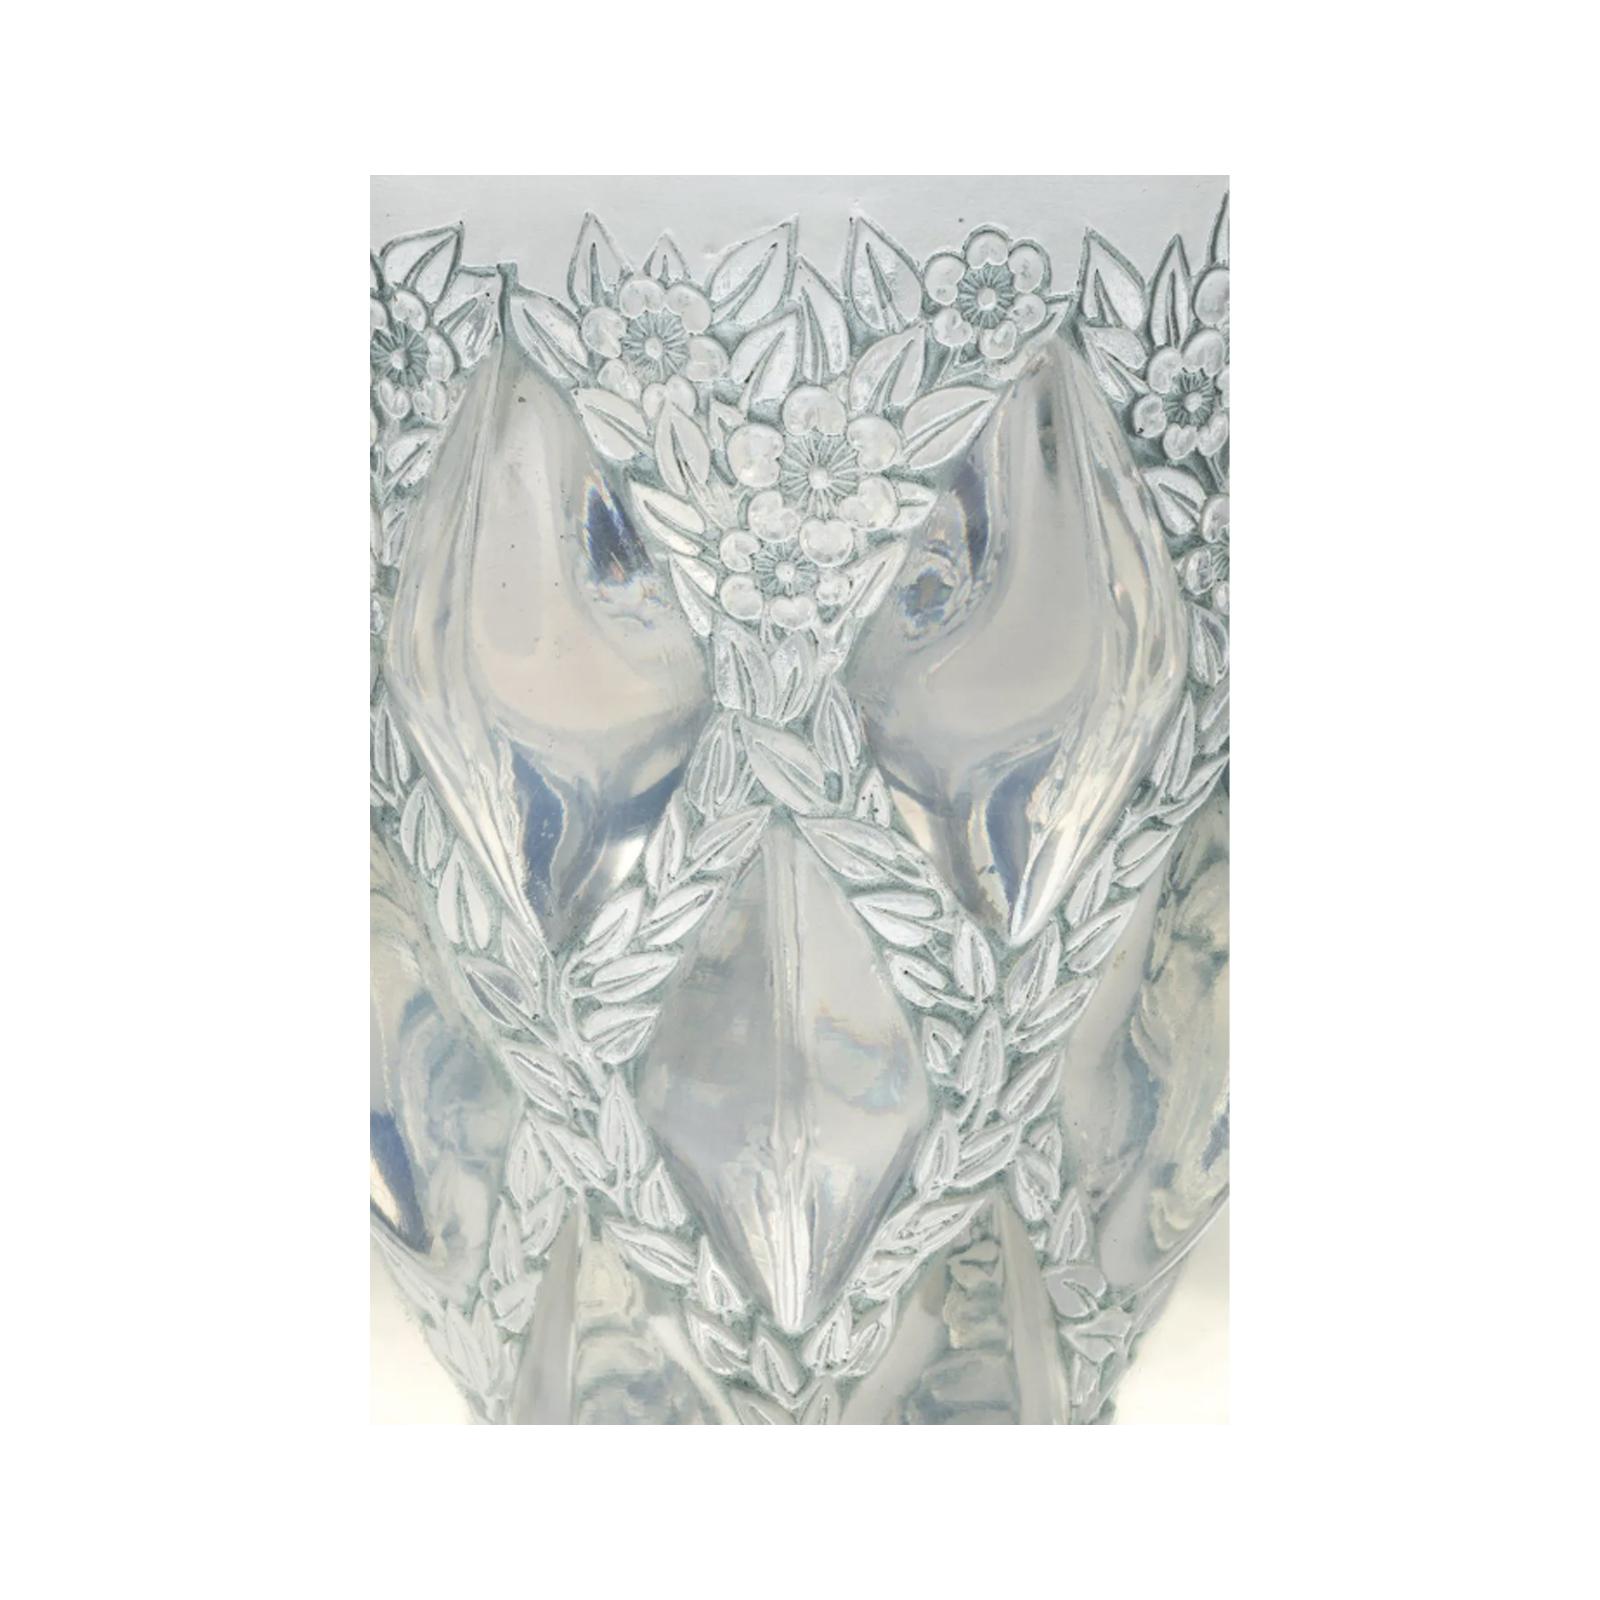 French René Lalique: “Rampillon” vase in opalescent glass For Sale